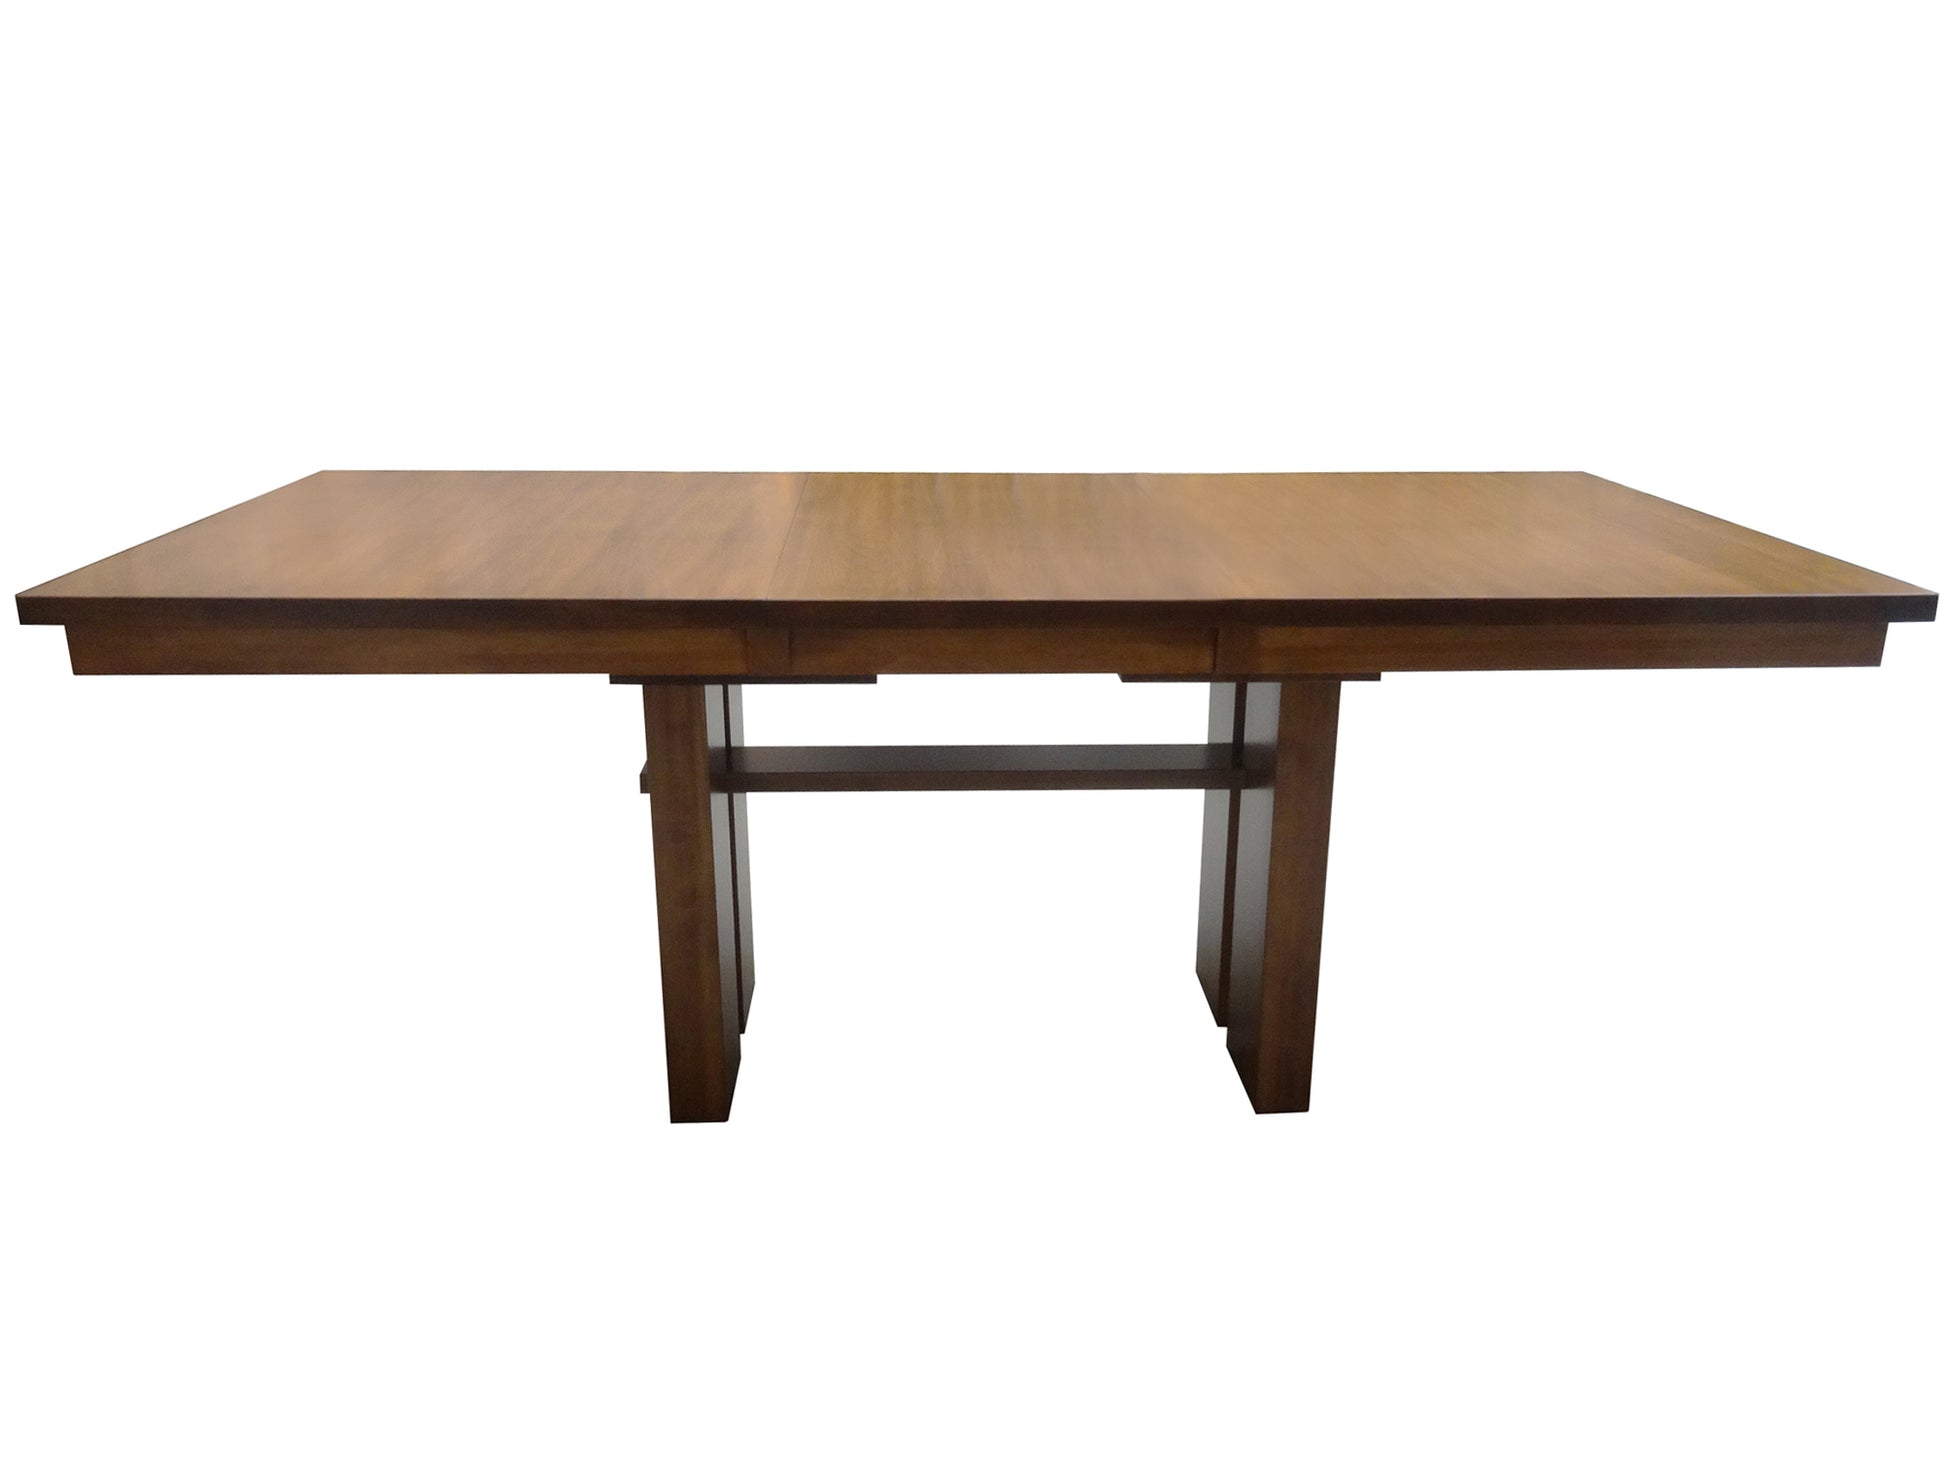 Chesterman Dining Table, solid wood and built to order, this is our exclusive design, made in Canada.